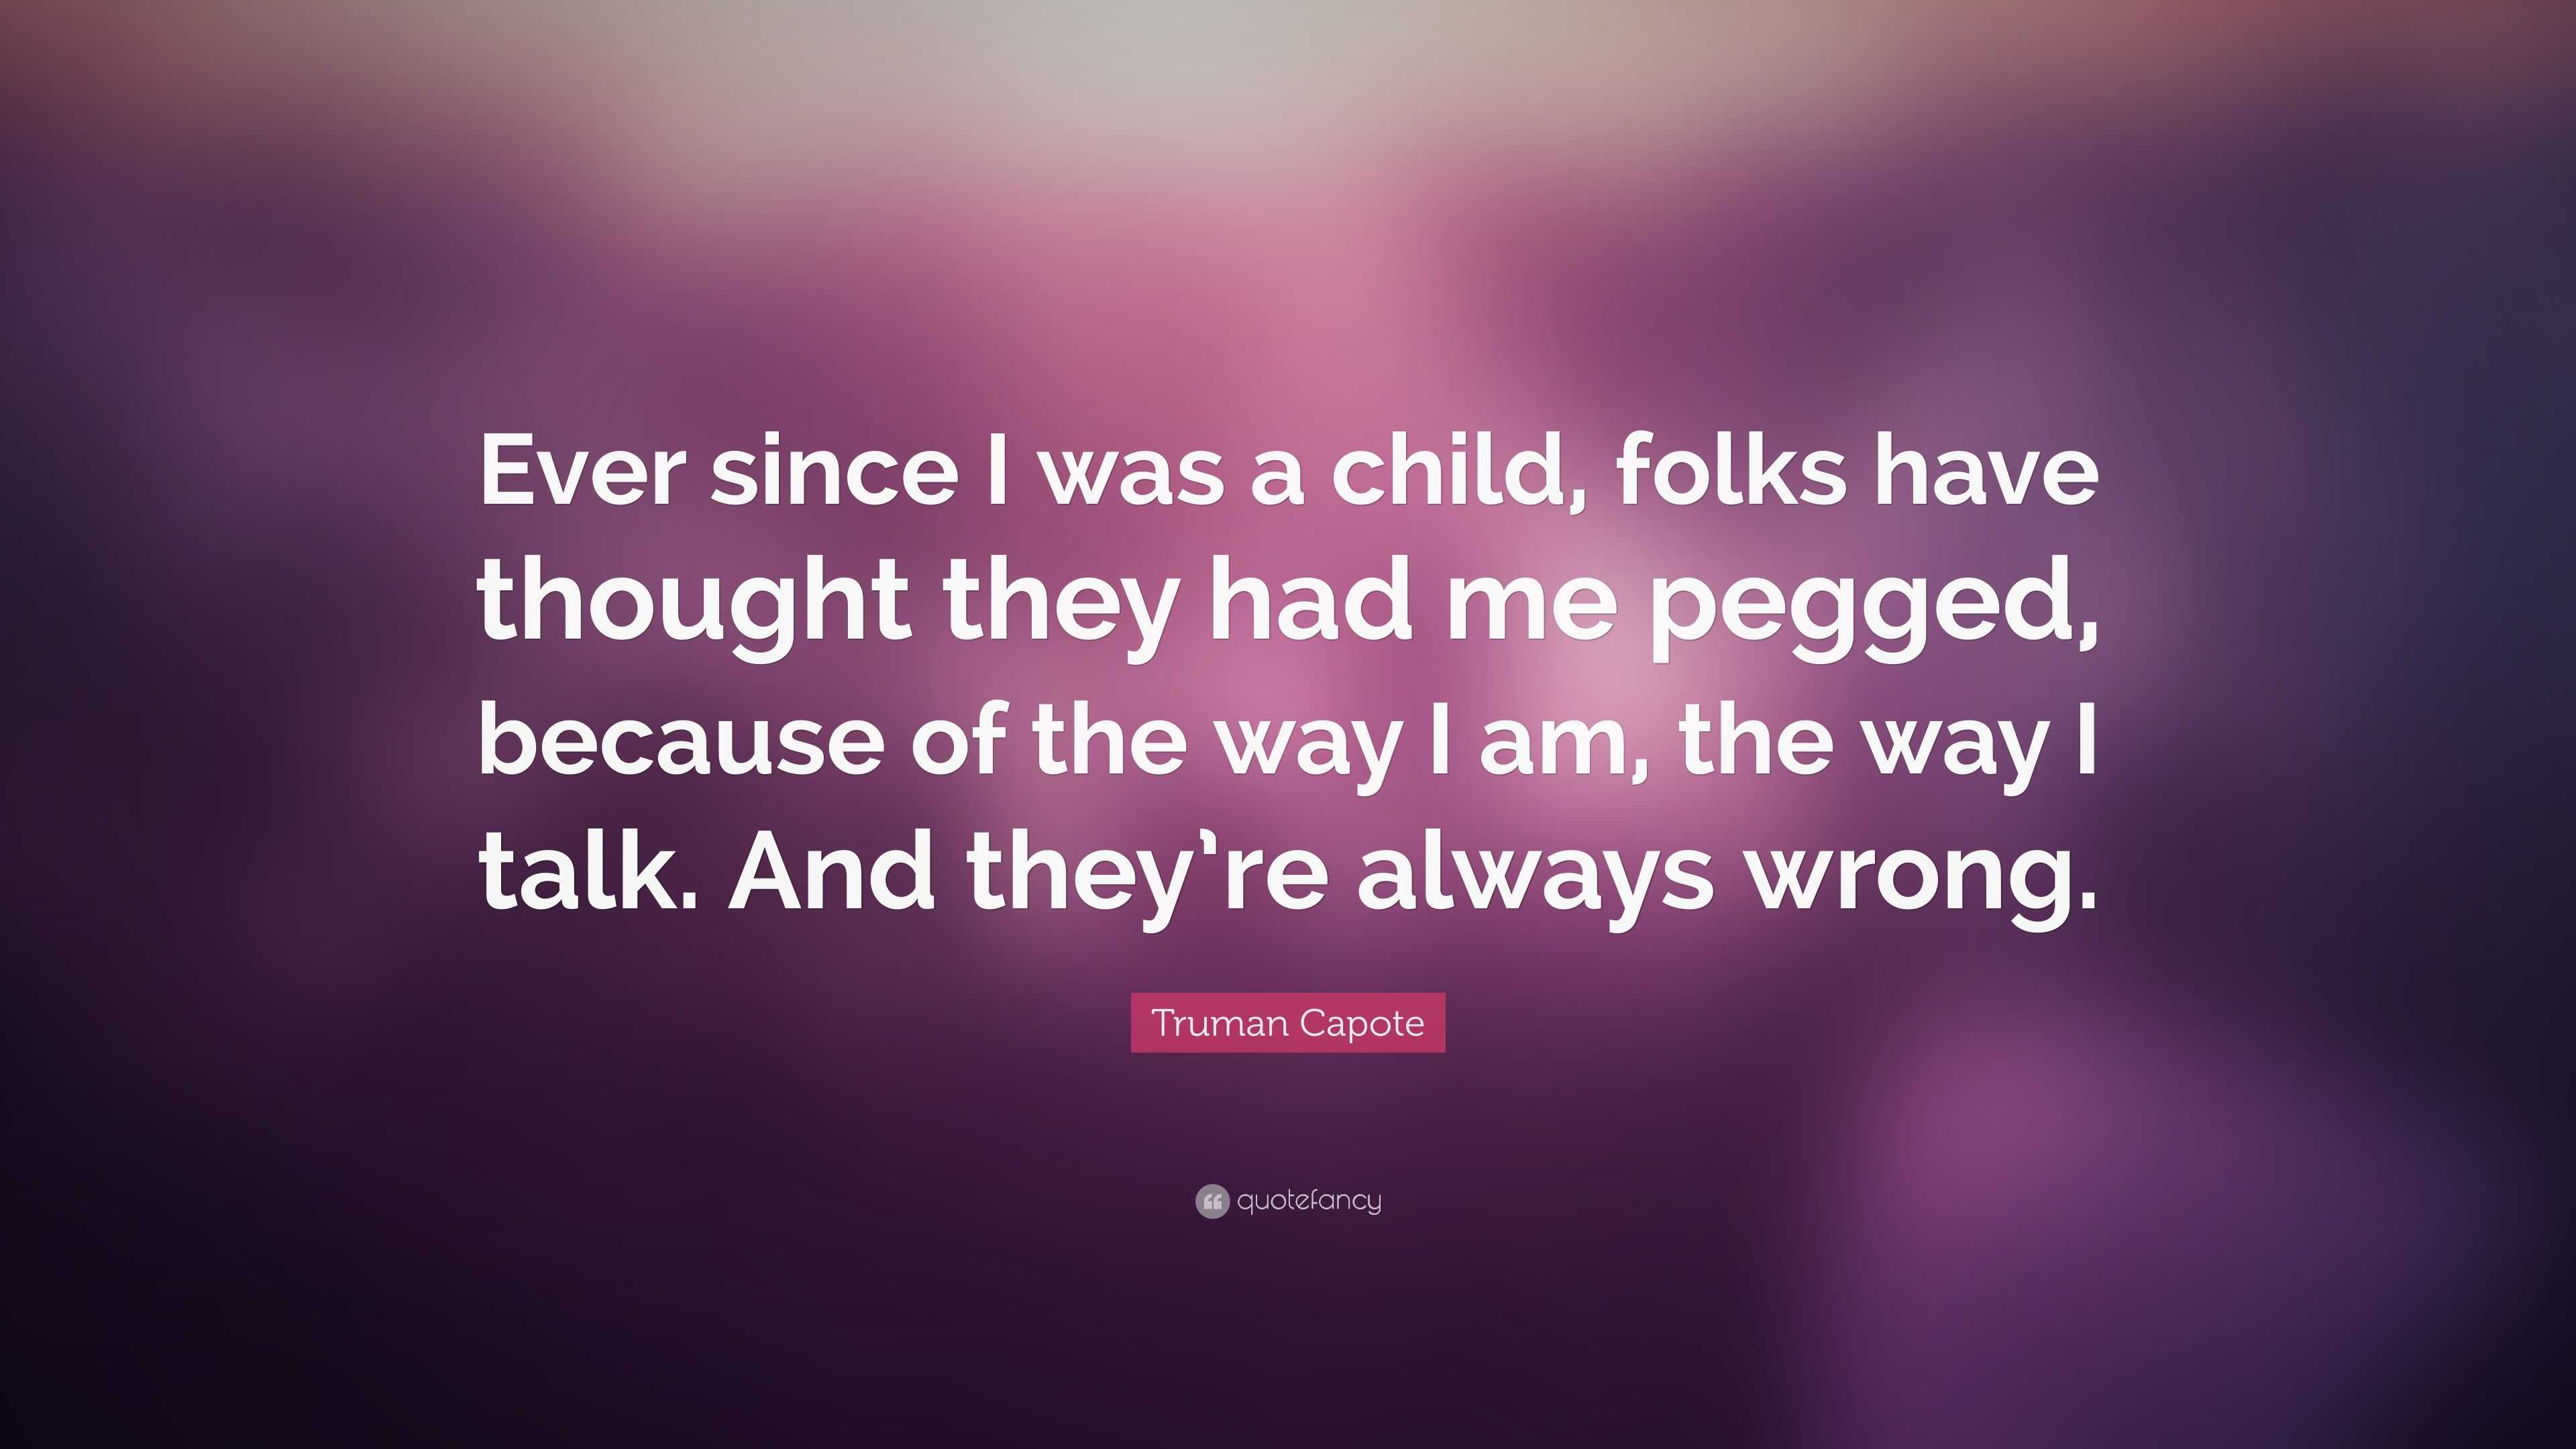 Truman Capote Quote: “Ever since I was a child, folks have thought they ...